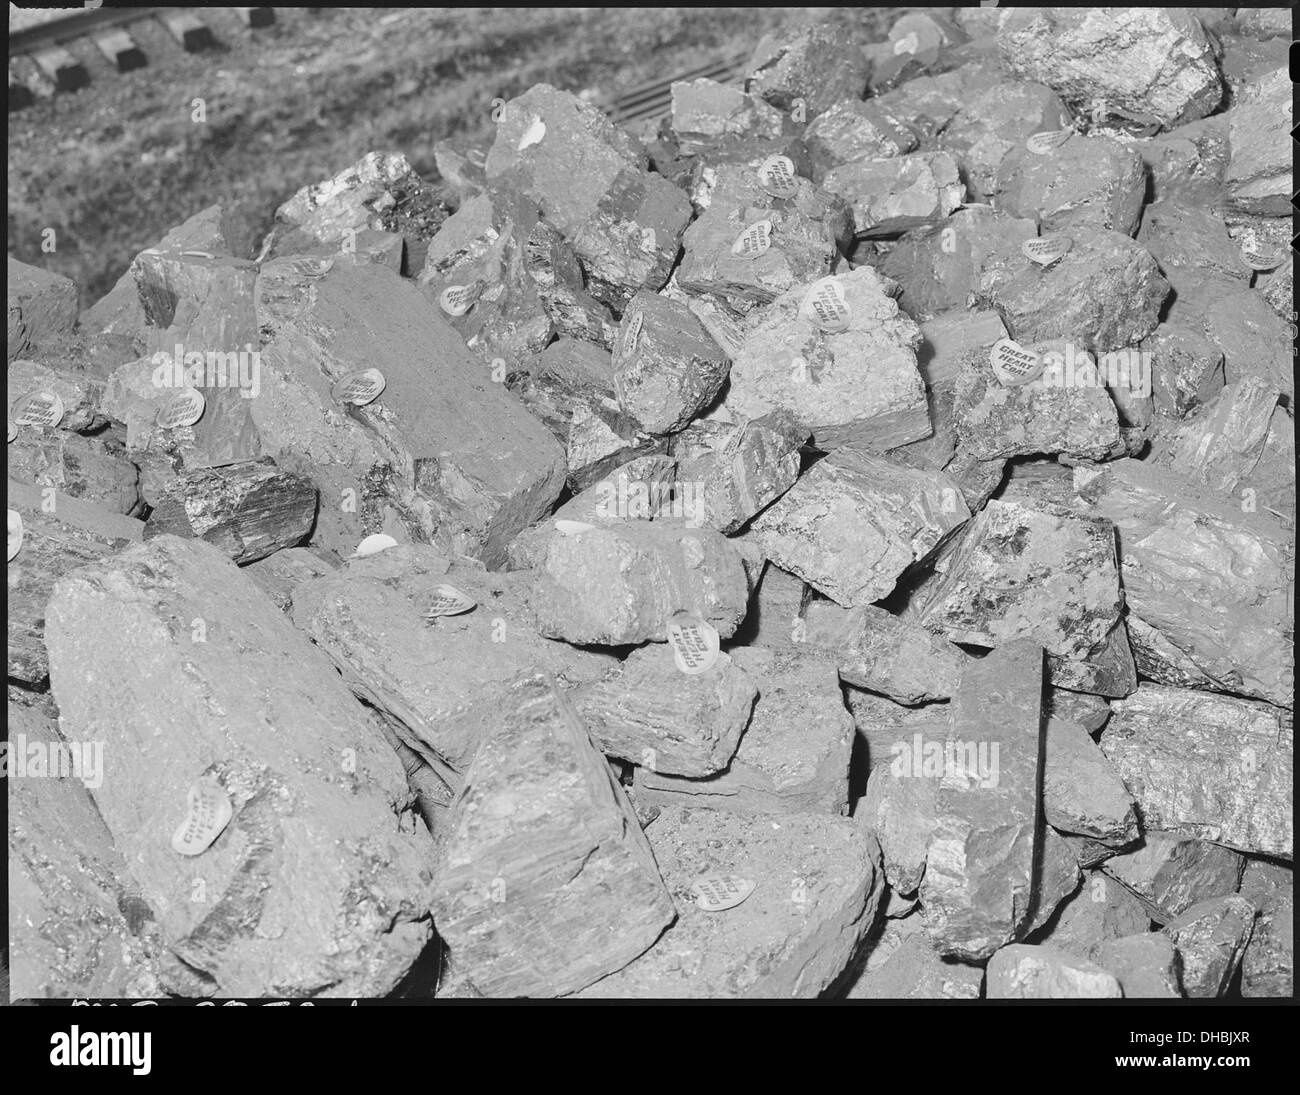 Coal produced by these two mines is labeled. Black Mountain Corporation, 30-31 Mines, Kenvir, Harlan County, Kentucky. 541281 Stock Photo